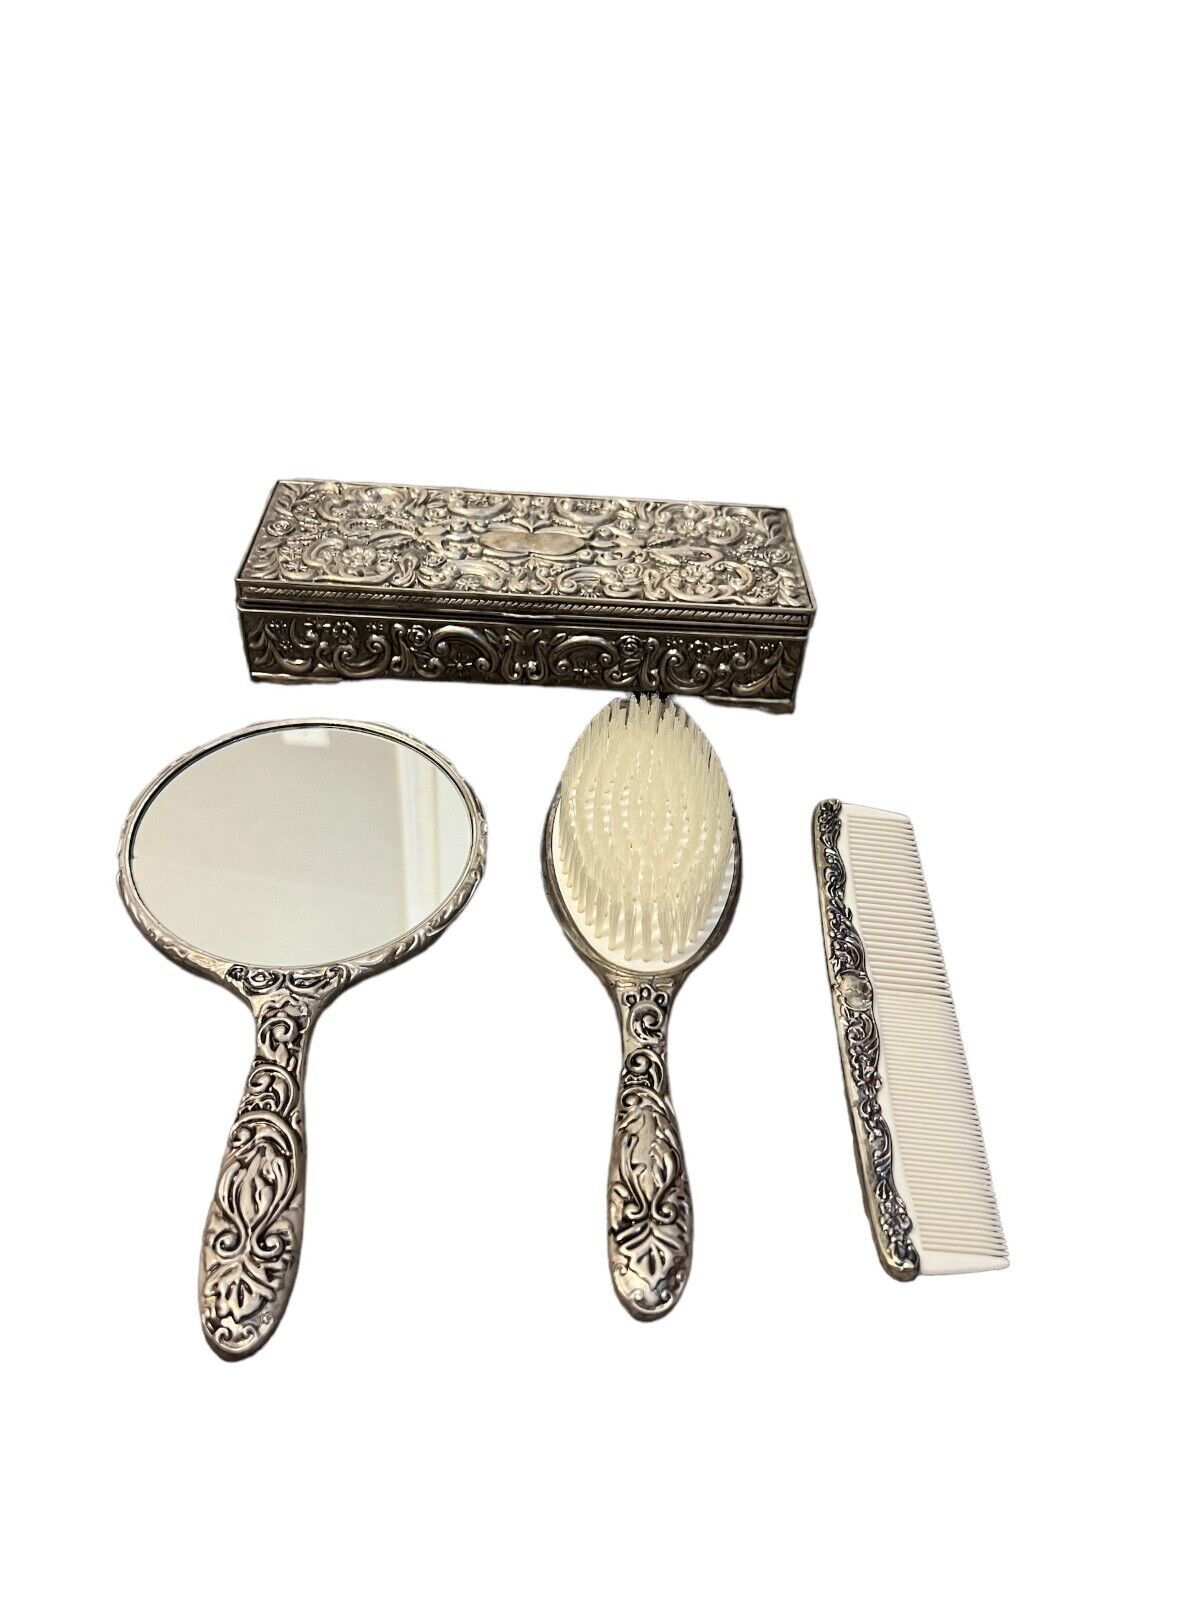 Godinger Ornate Silver Plated Jewelry Box, Hand Mirror, Comb, And Brush